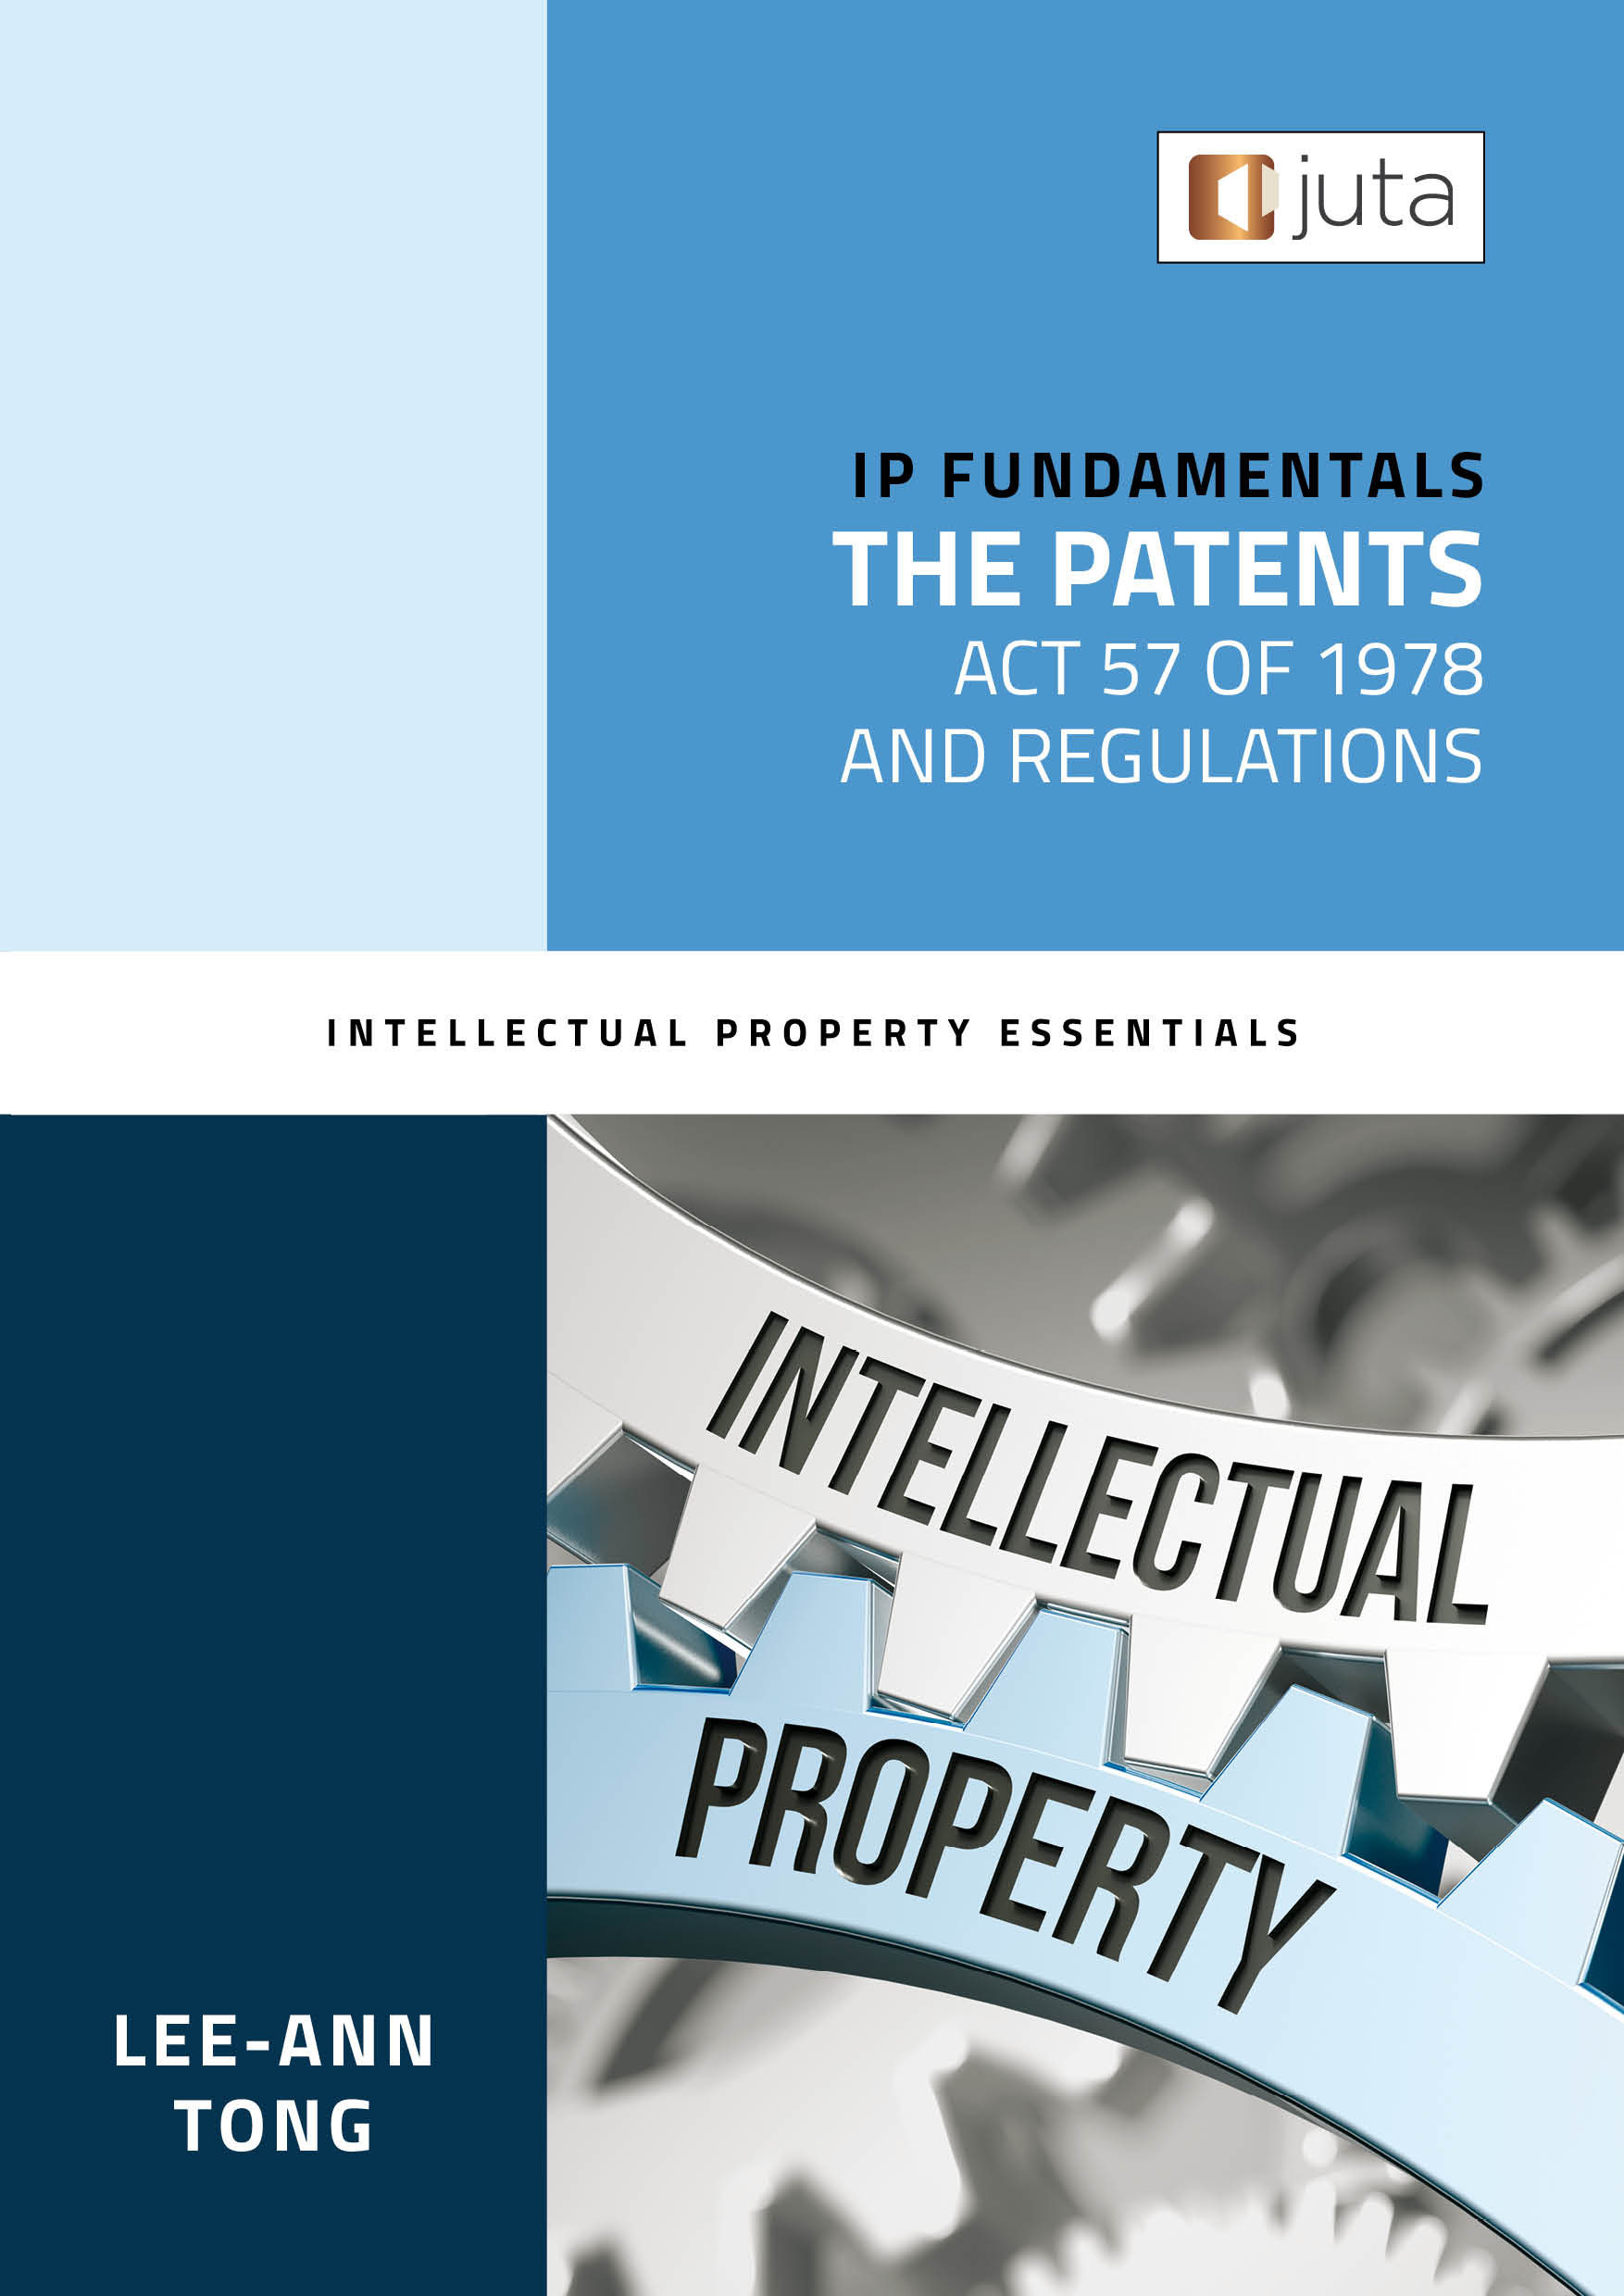 IP Fundamentals: The Patents Act 57 of 1978 and Regulations